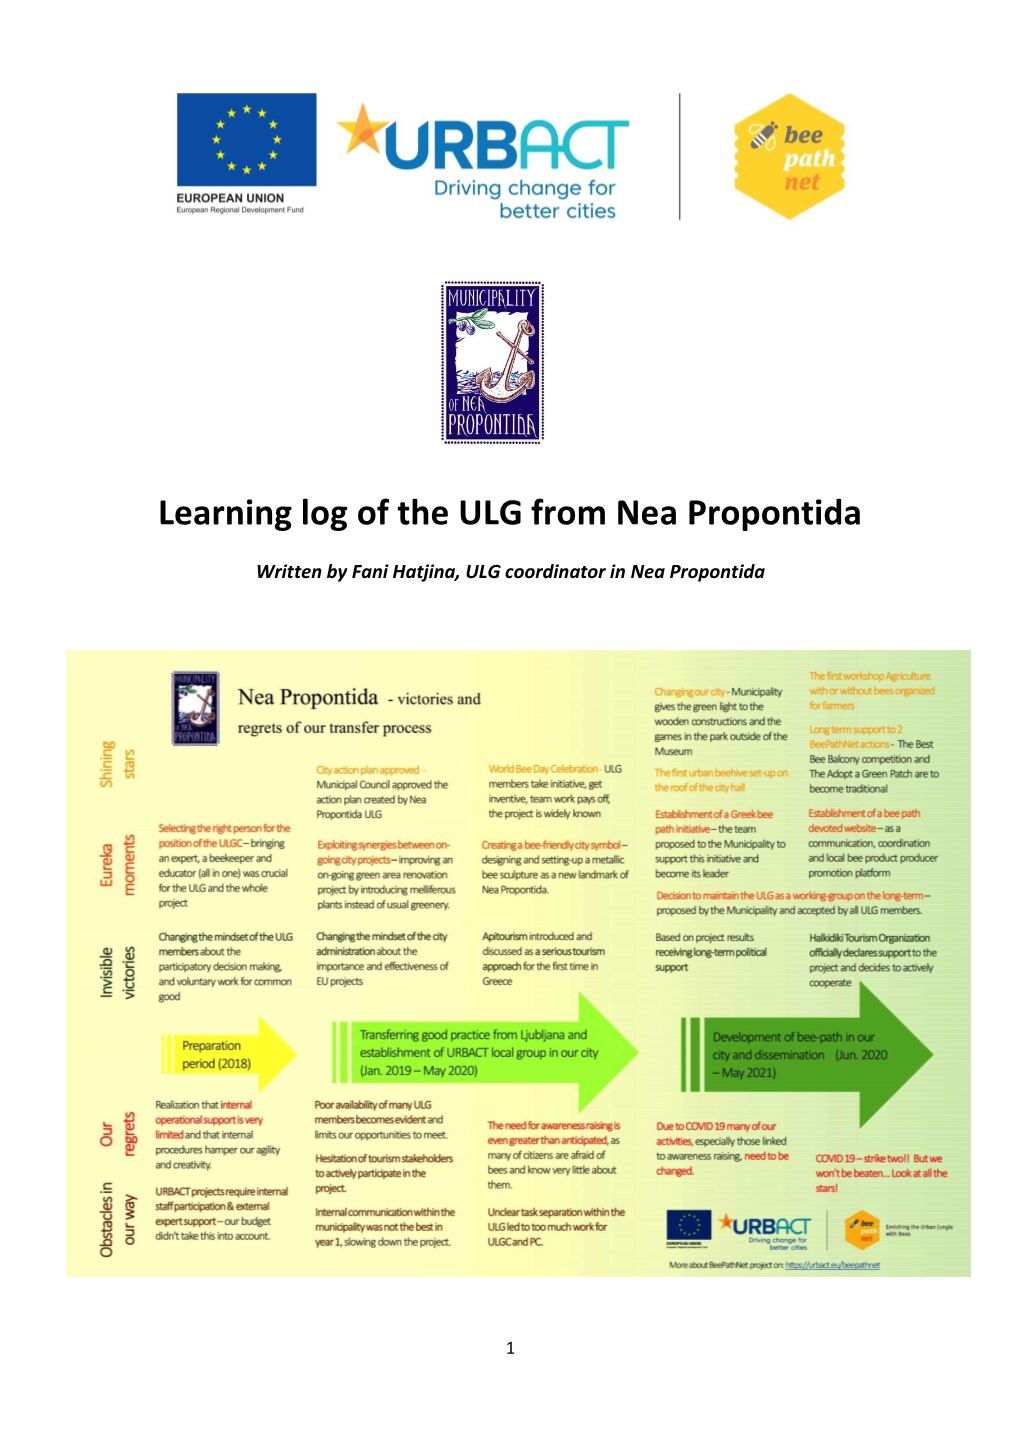 Learning Log of the ULG from Nea Propontida